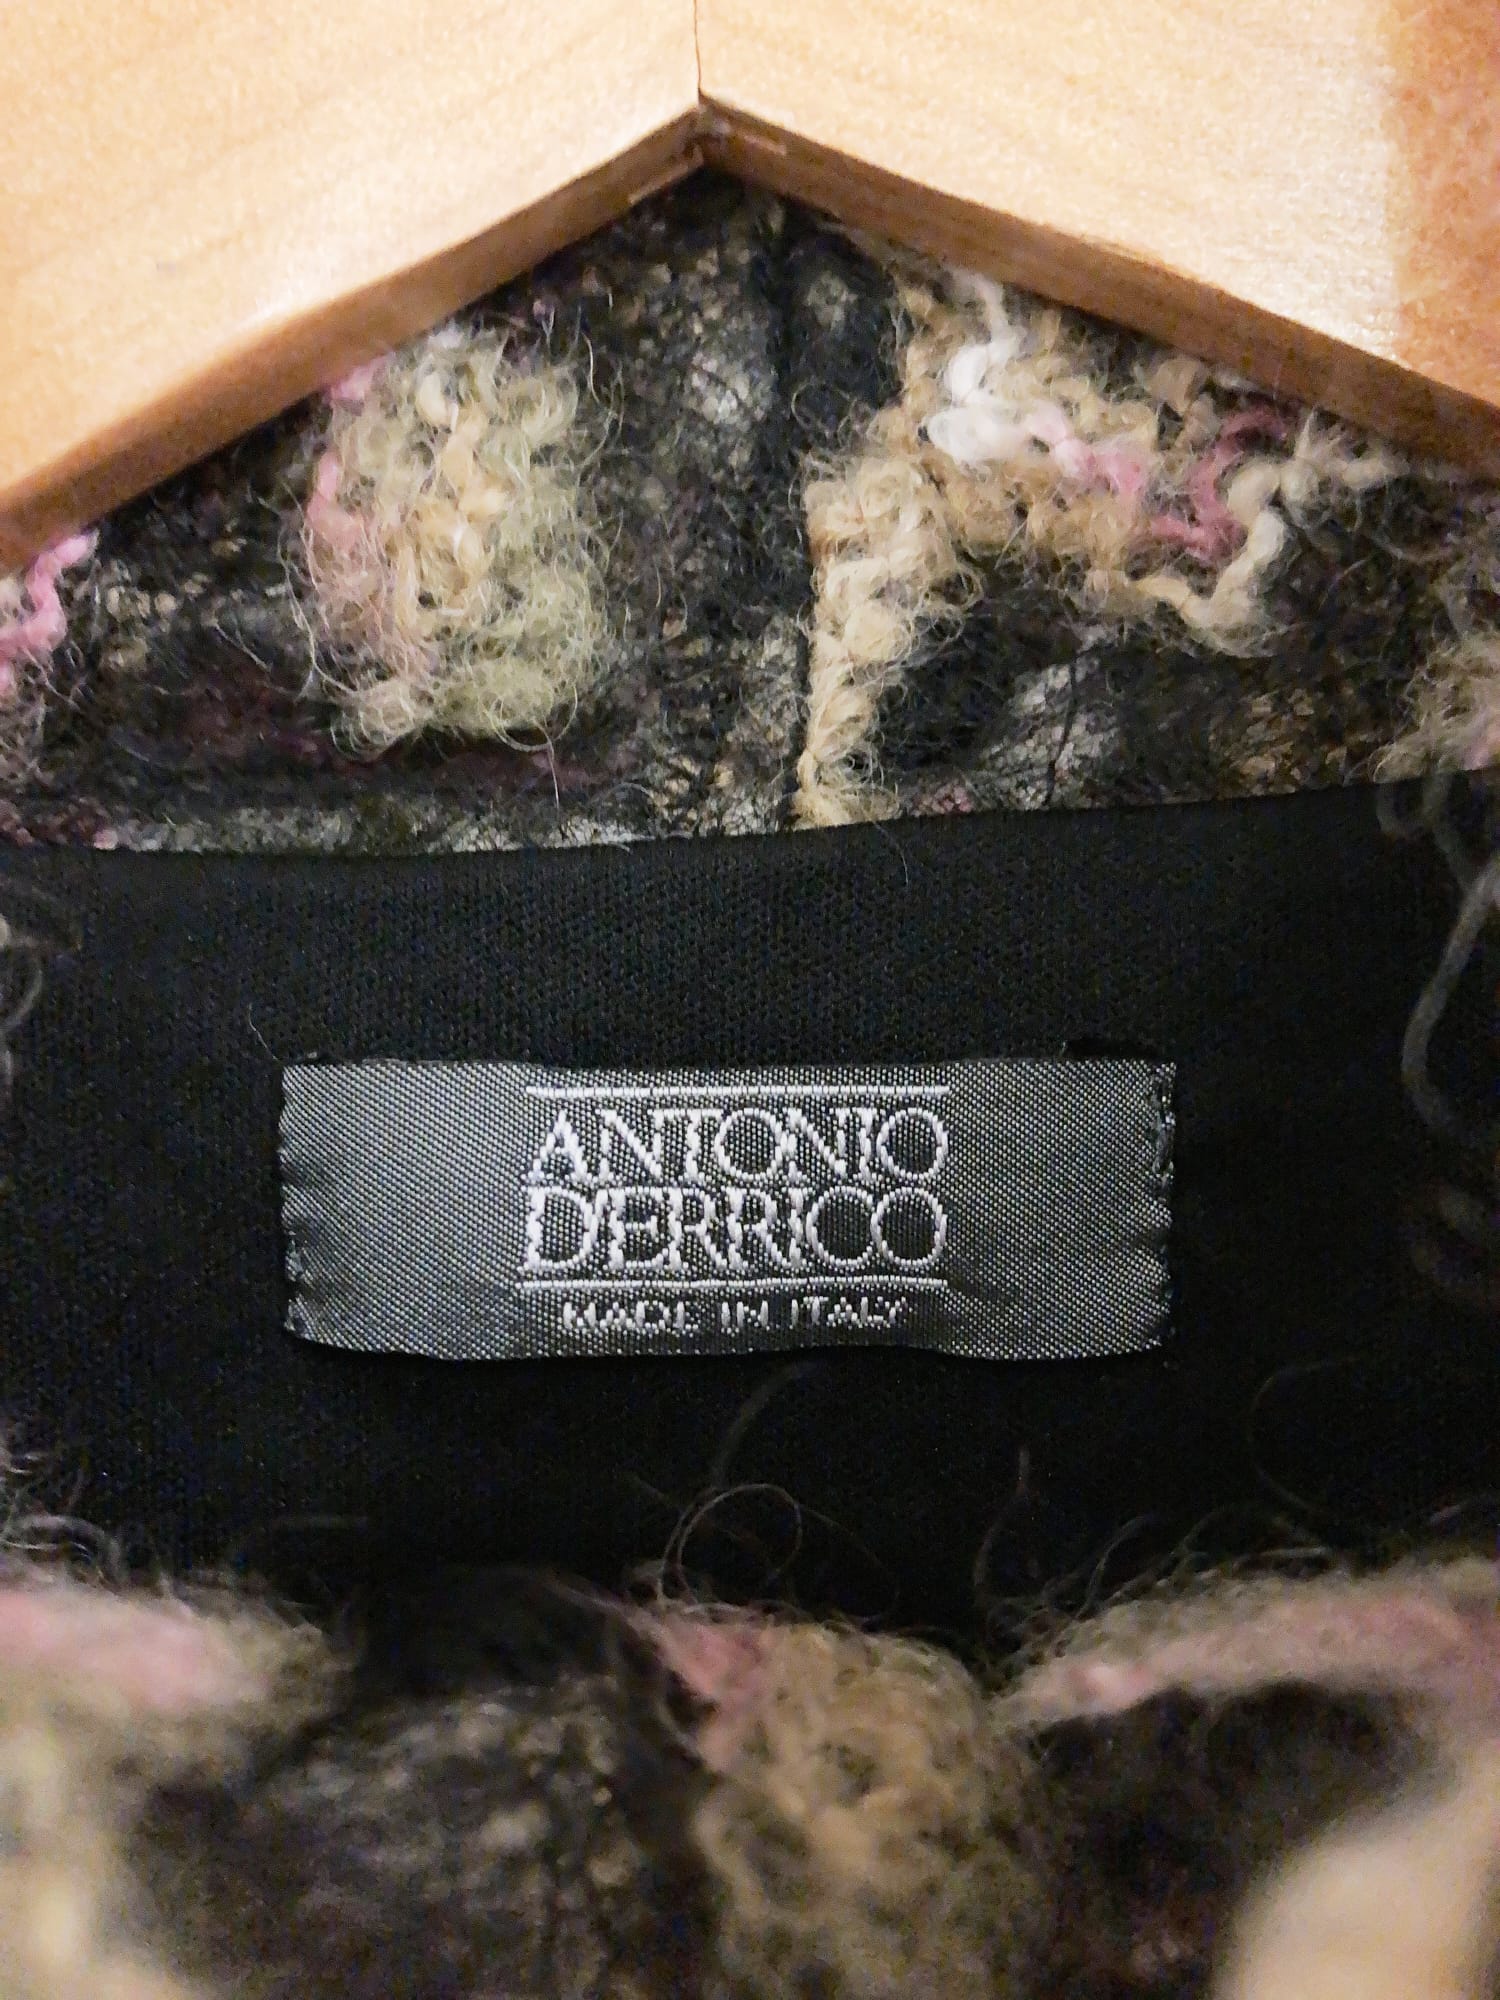 Antonio D’Errico 3D floral embroidered mini dress with sheer sections